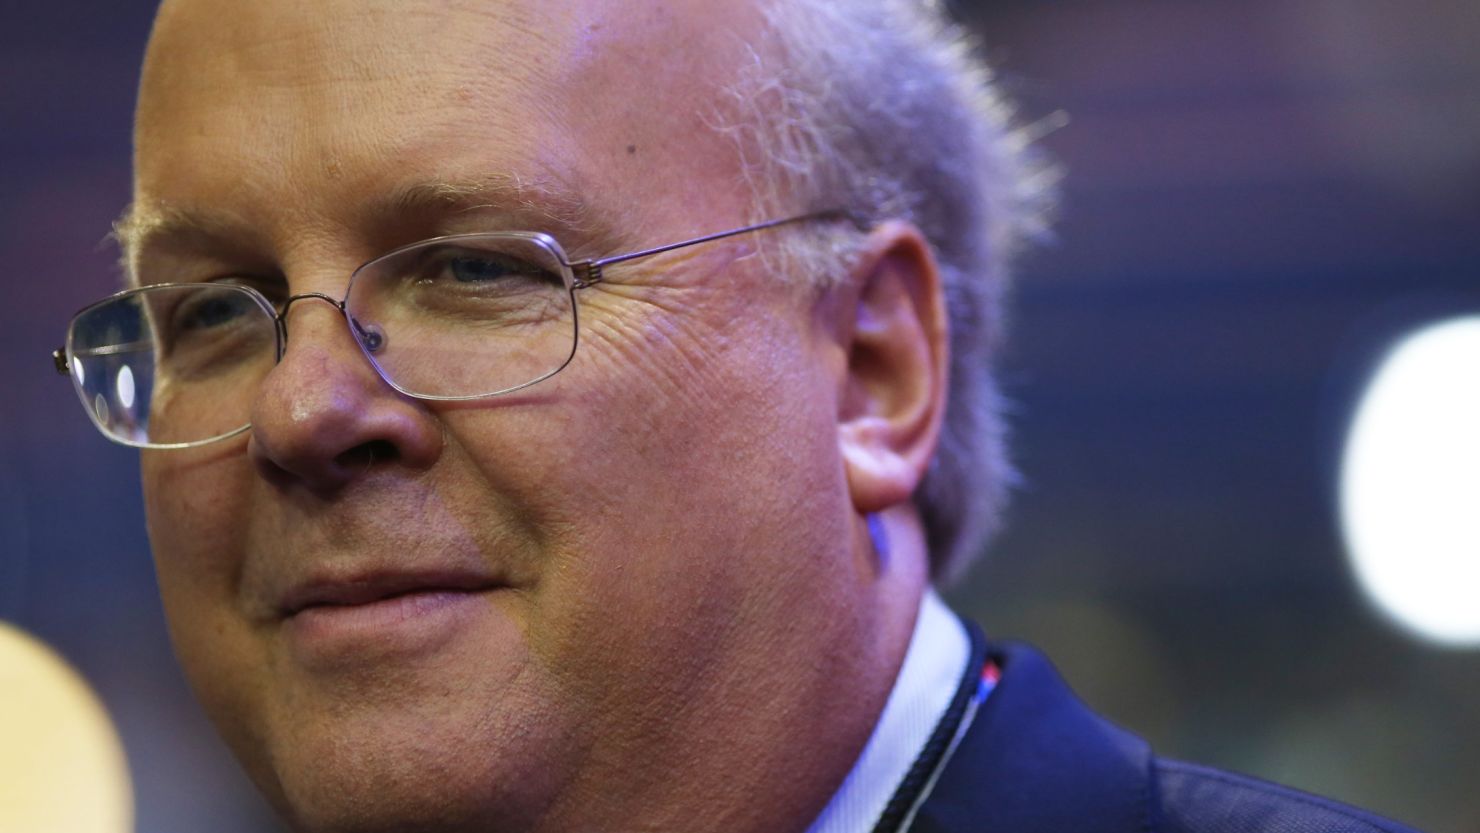 Karl Rove, former Deputy Chief of Staff and Senior Policy Advisor to US President George W. Bush, walks on the floor before the start of the second day of the Republican National Convention at the Tampa Bay Times Forum on August 28, 2012, in Tampa, Florida. 